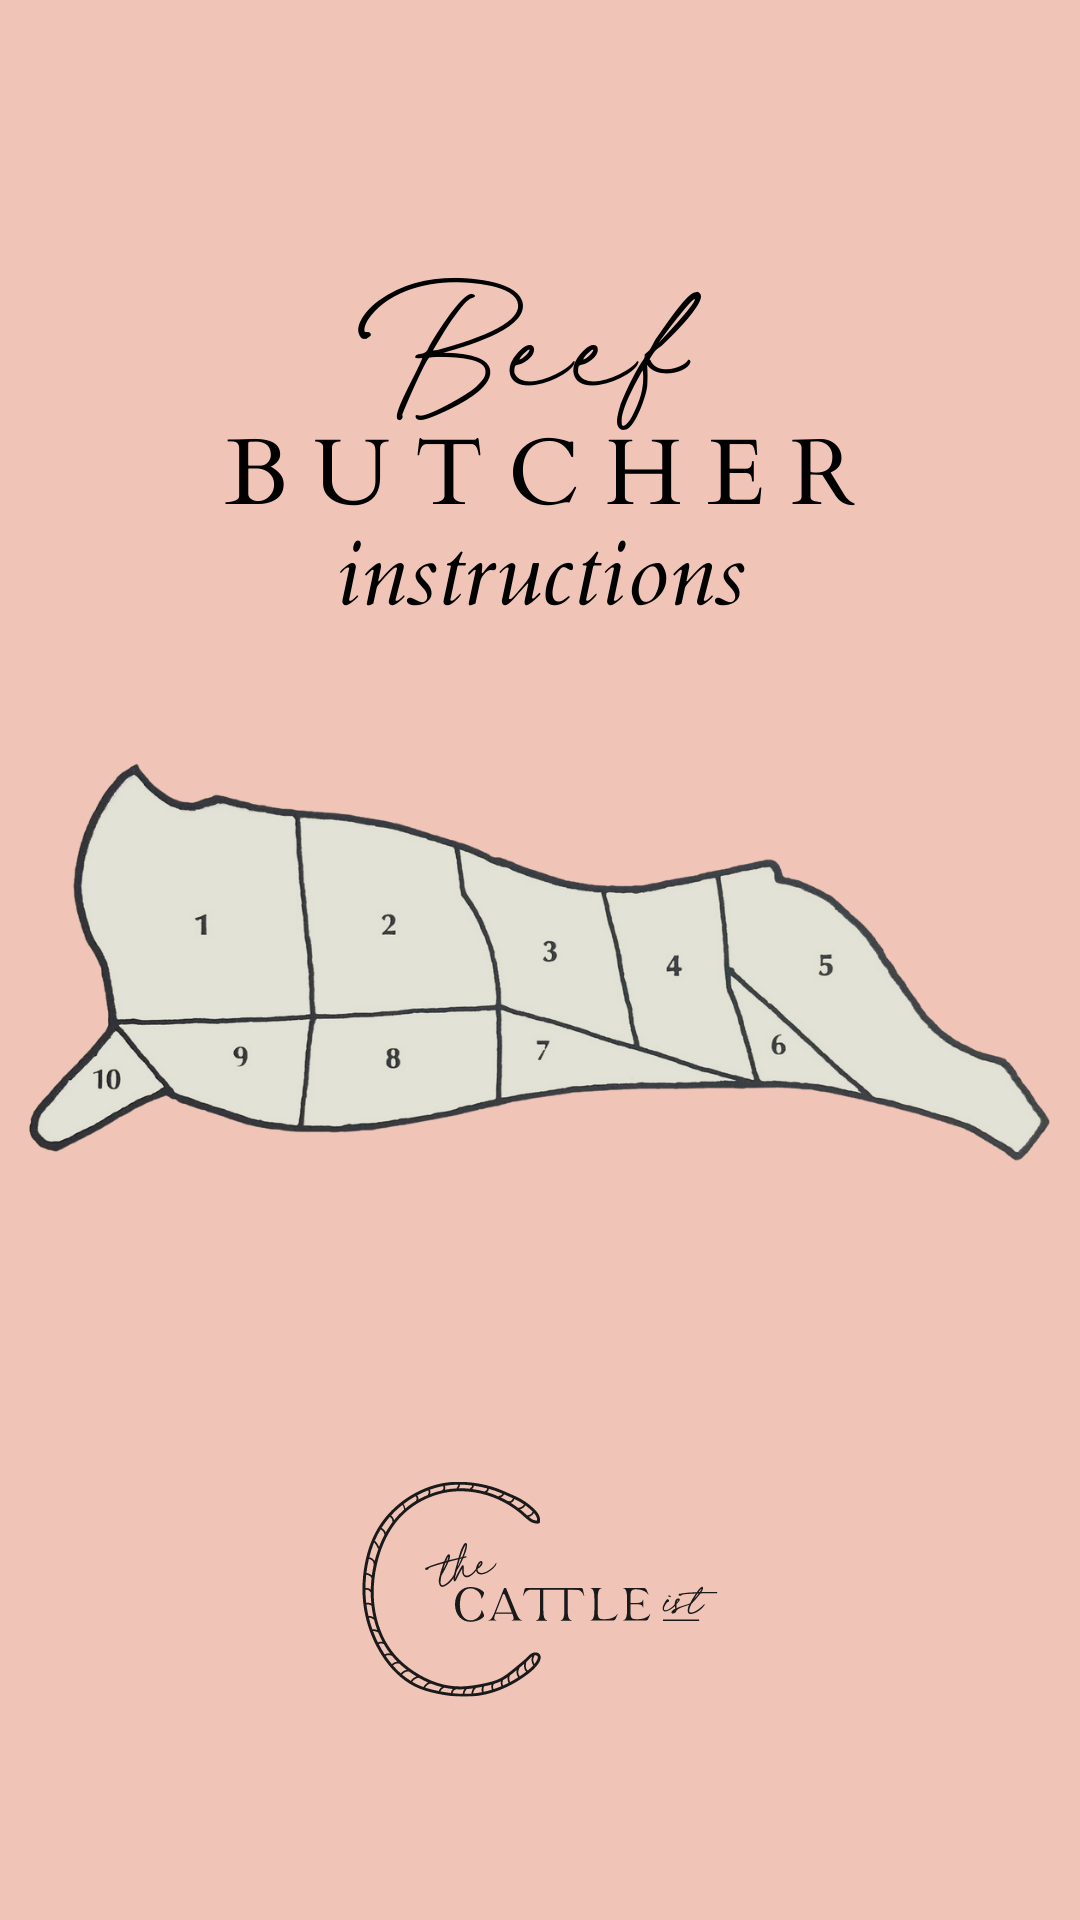 Beef Butcher Instructions Cover Image showing a beef cut chart